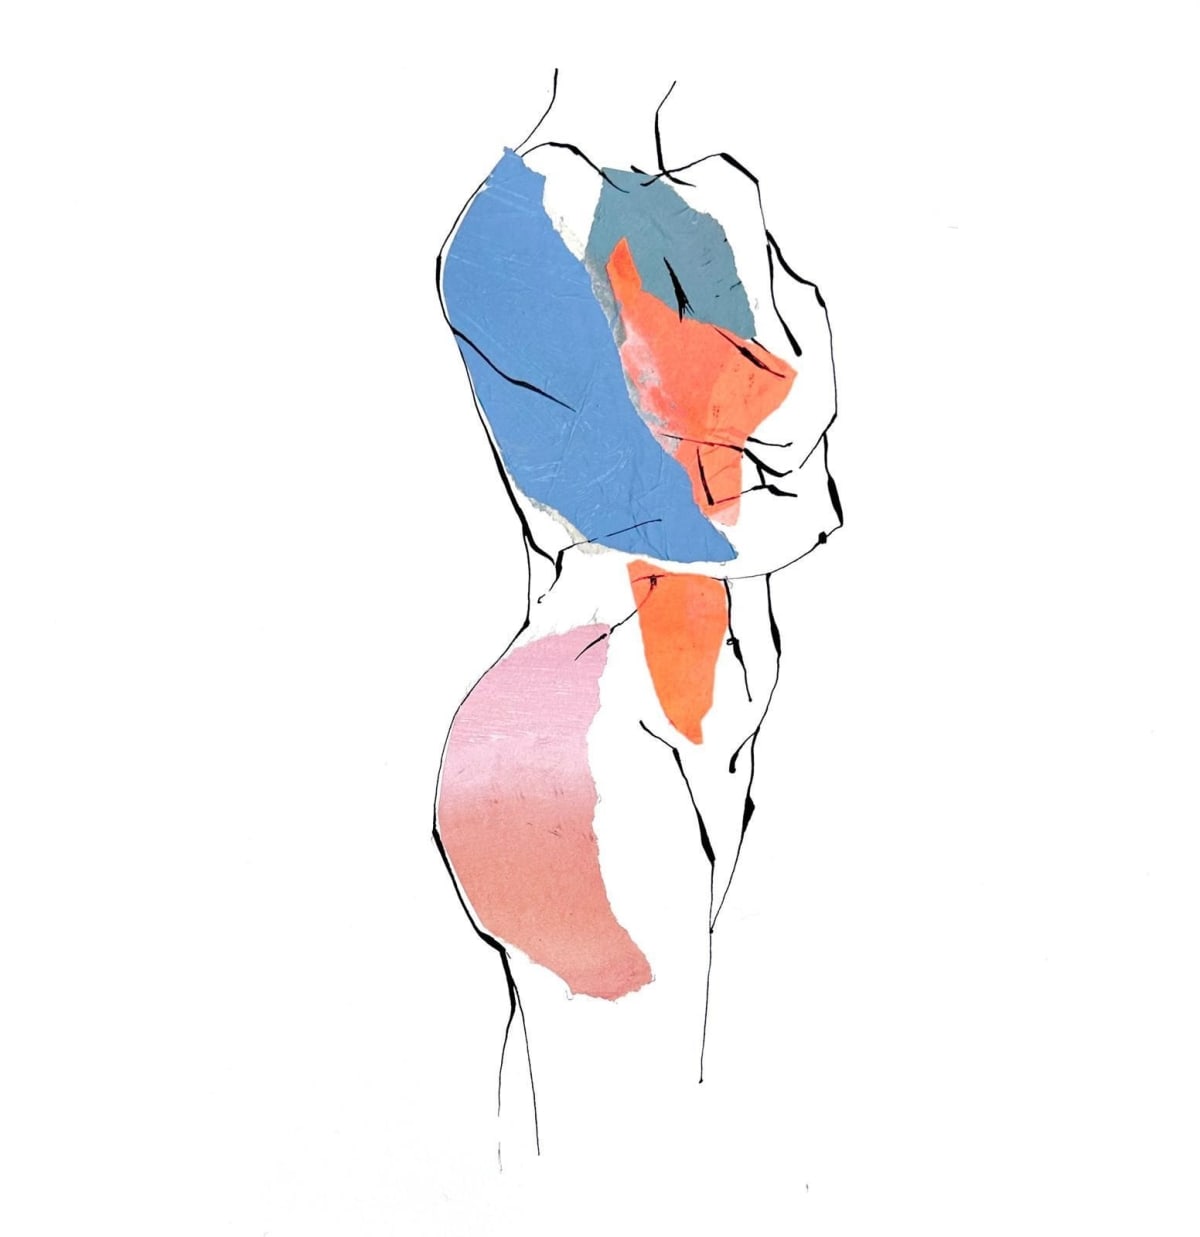 Folded arms in blue and orange, 2023